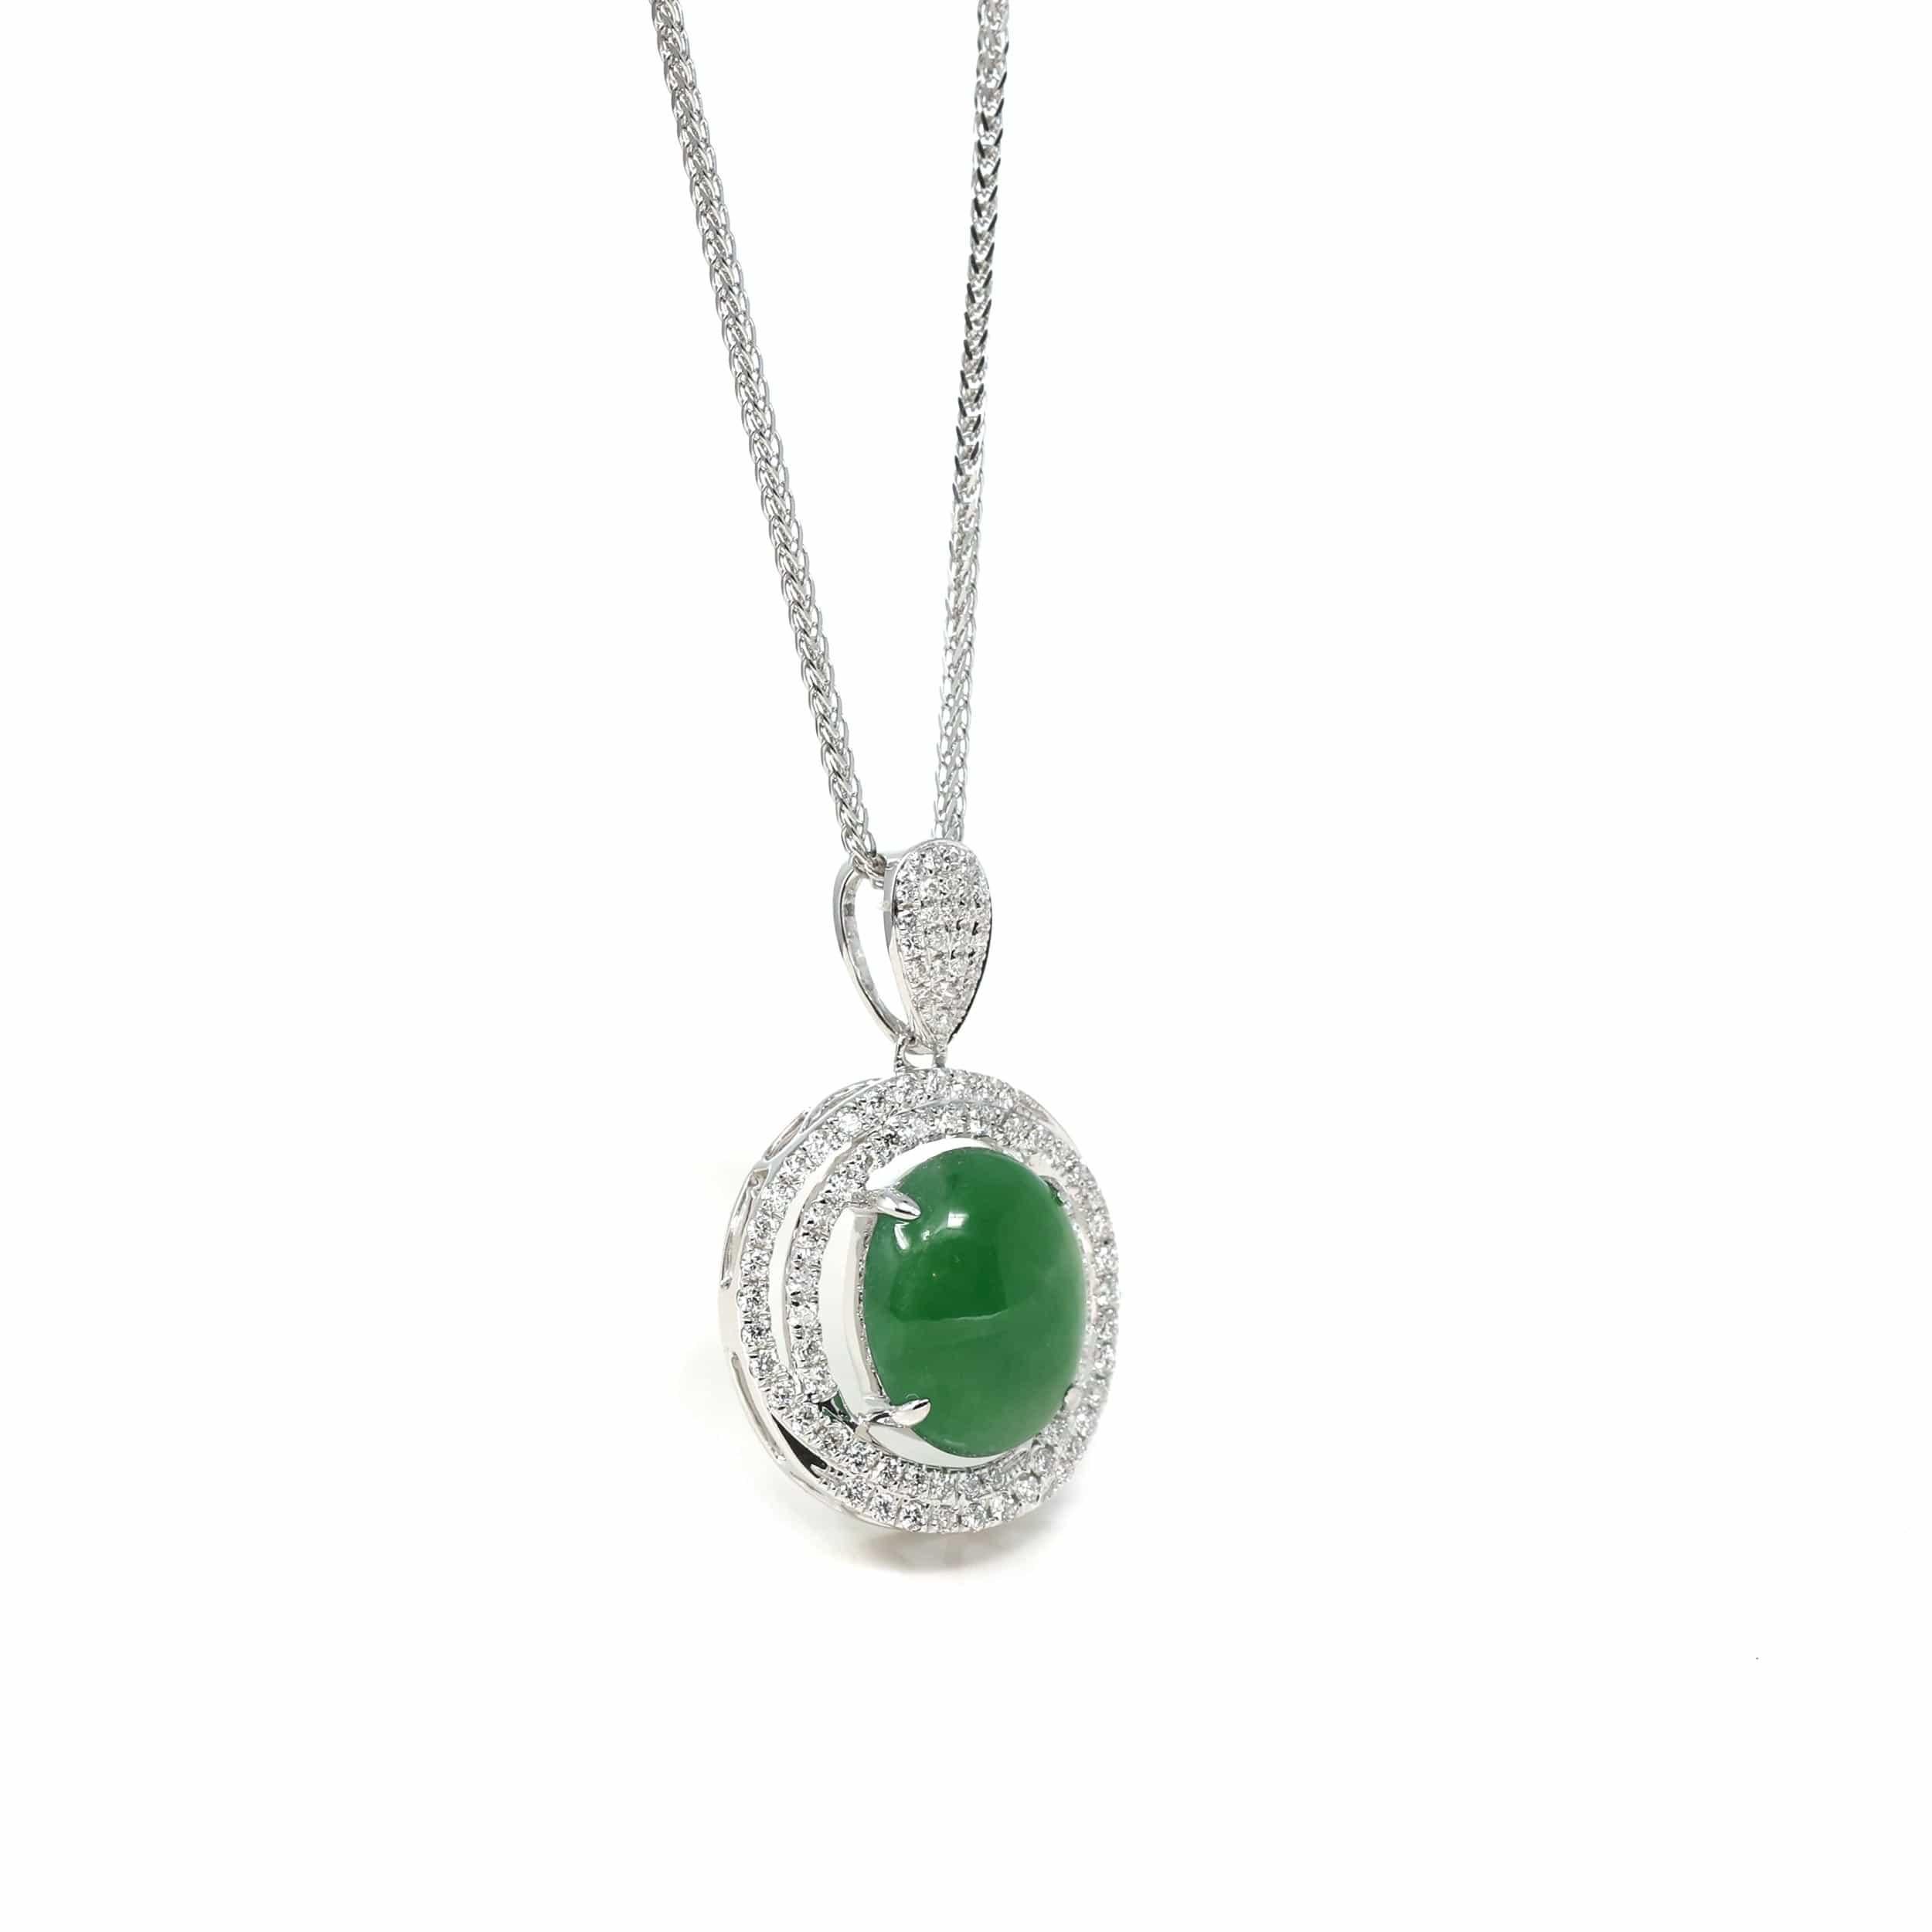 * DESIGN CONCEPT--- This necklace is very special, made with a stunning piece of imperial green jadeite jade. As photographed, the translucency of the jade is stunning. Surrounded by brilliant SI1 G-H color diamonds. Jade if this quality is rare in